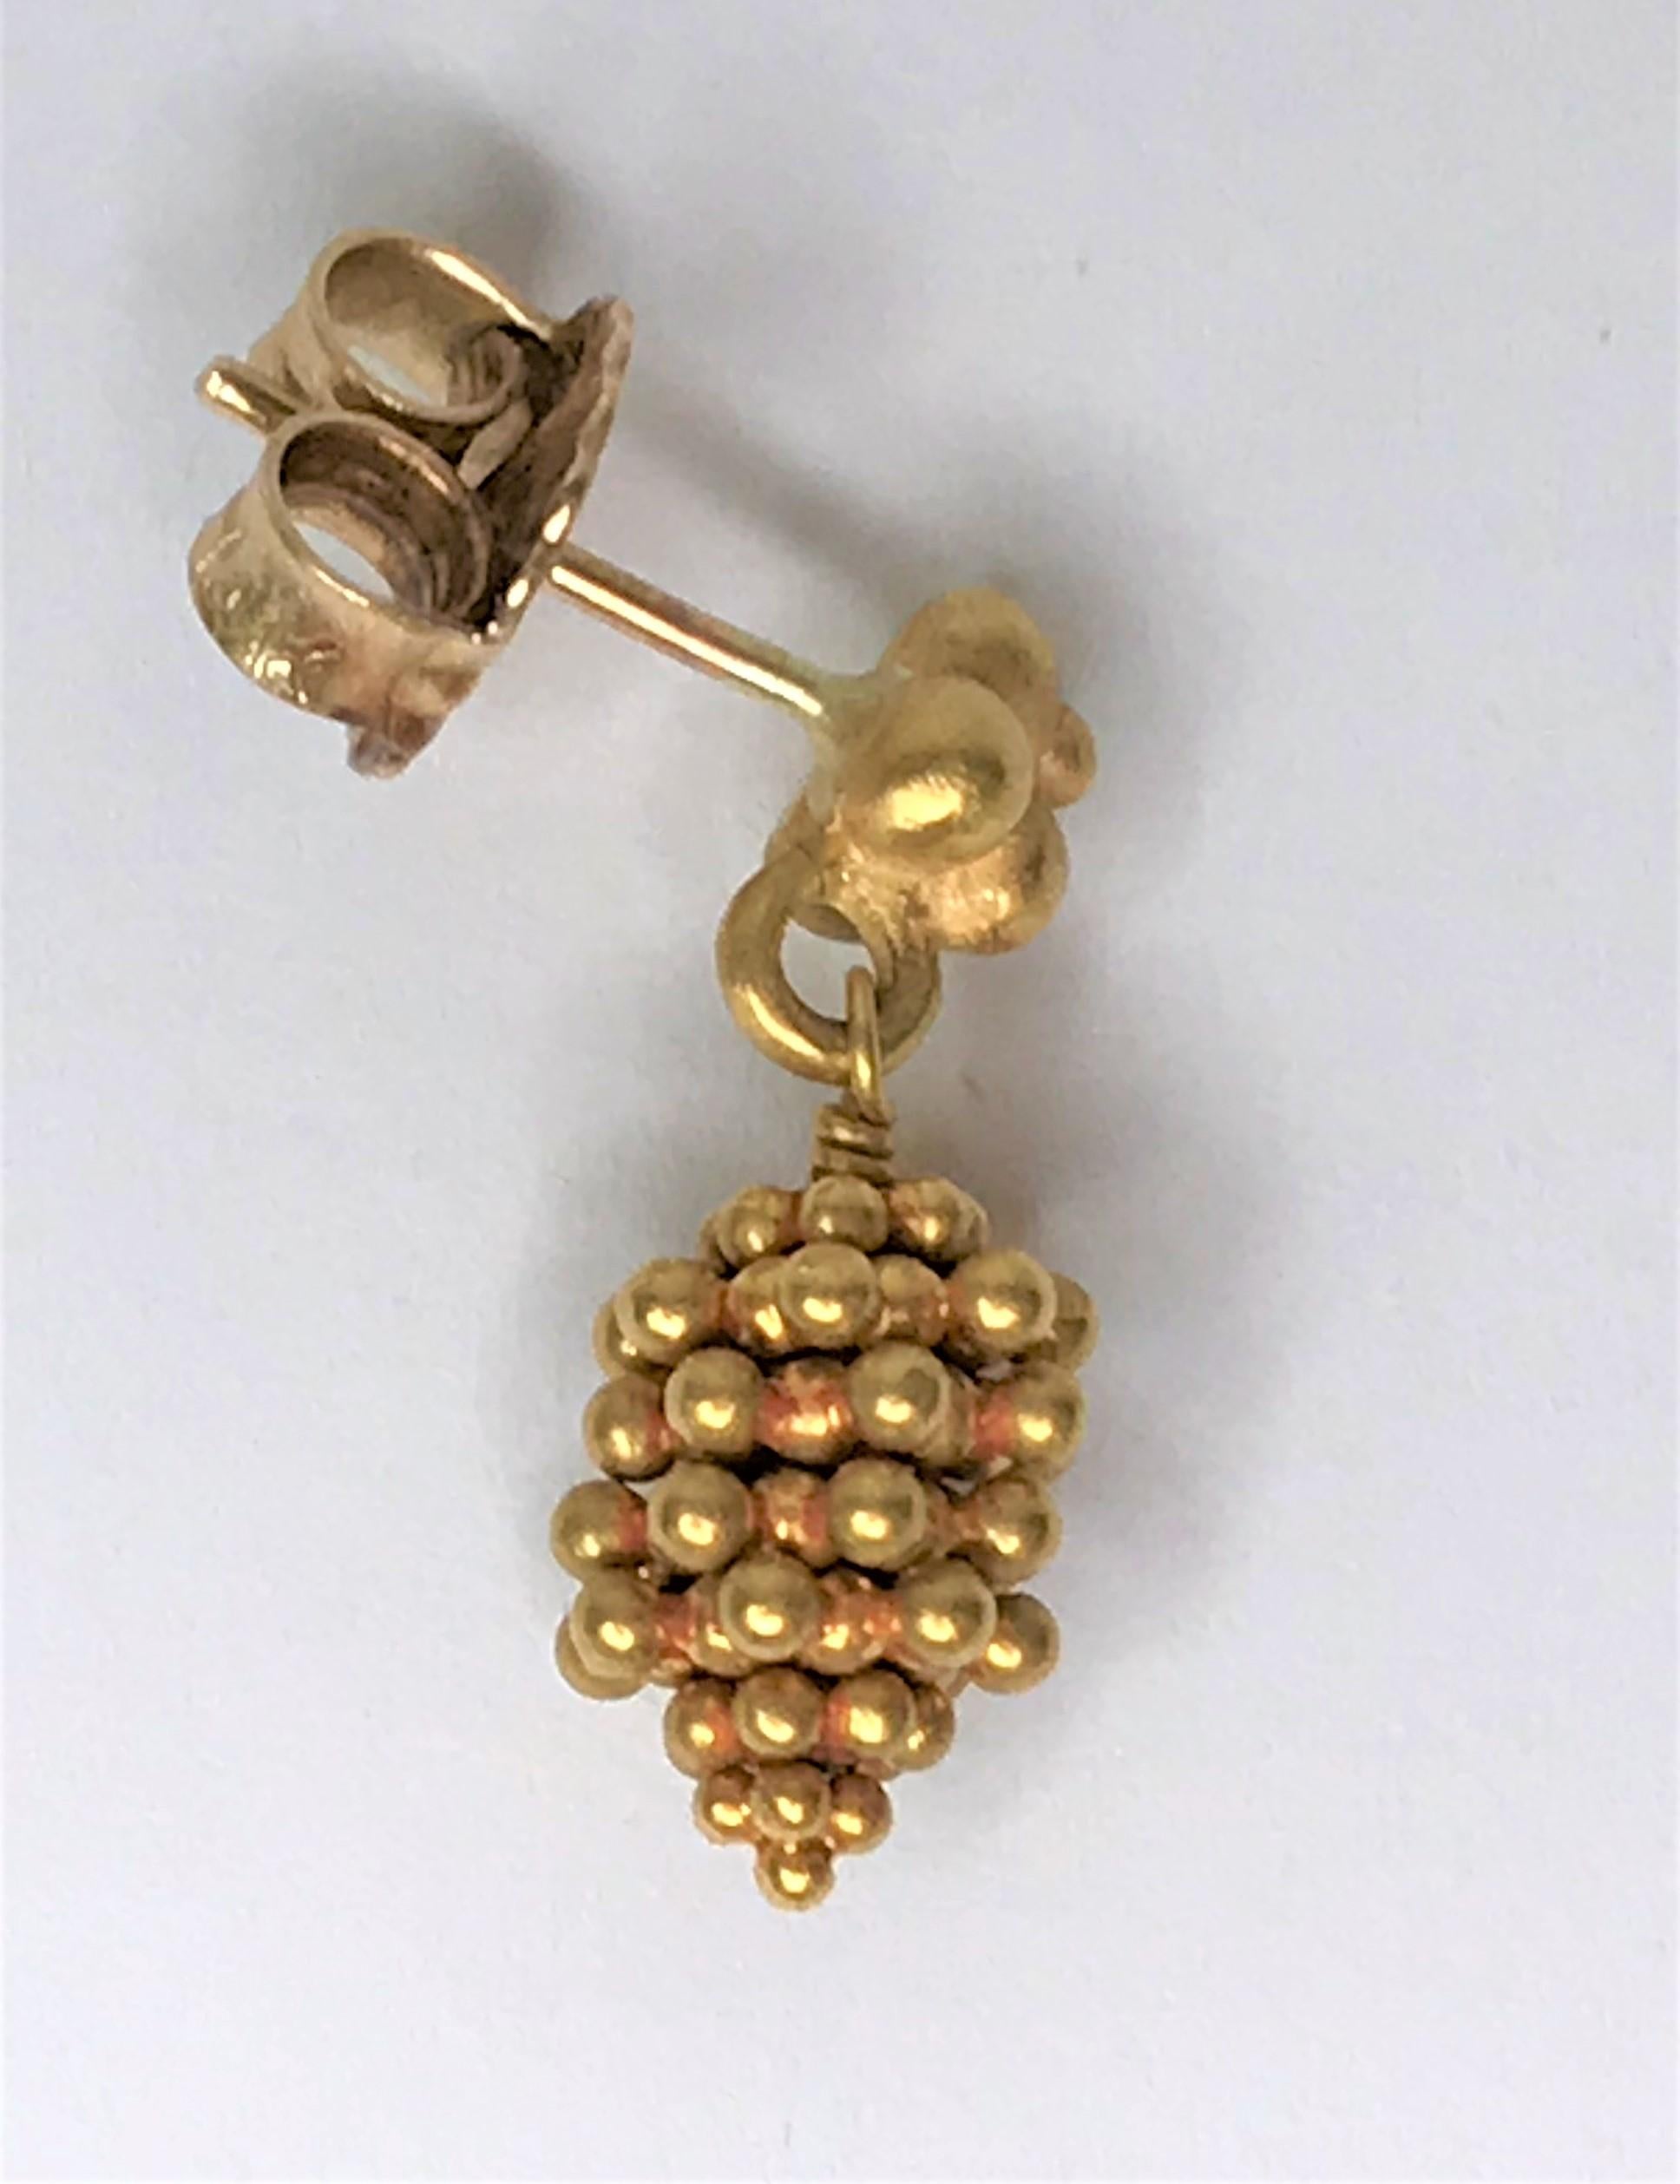 By designer Laura Gibson, these darling earrings are an easy to wear staple.
22 karat yellow gold 'acorn' style dangle
Approximately 18mm long (including stud and dangle) x 7mm wide
Post with friction back
Large, 14K yellow gold backs
